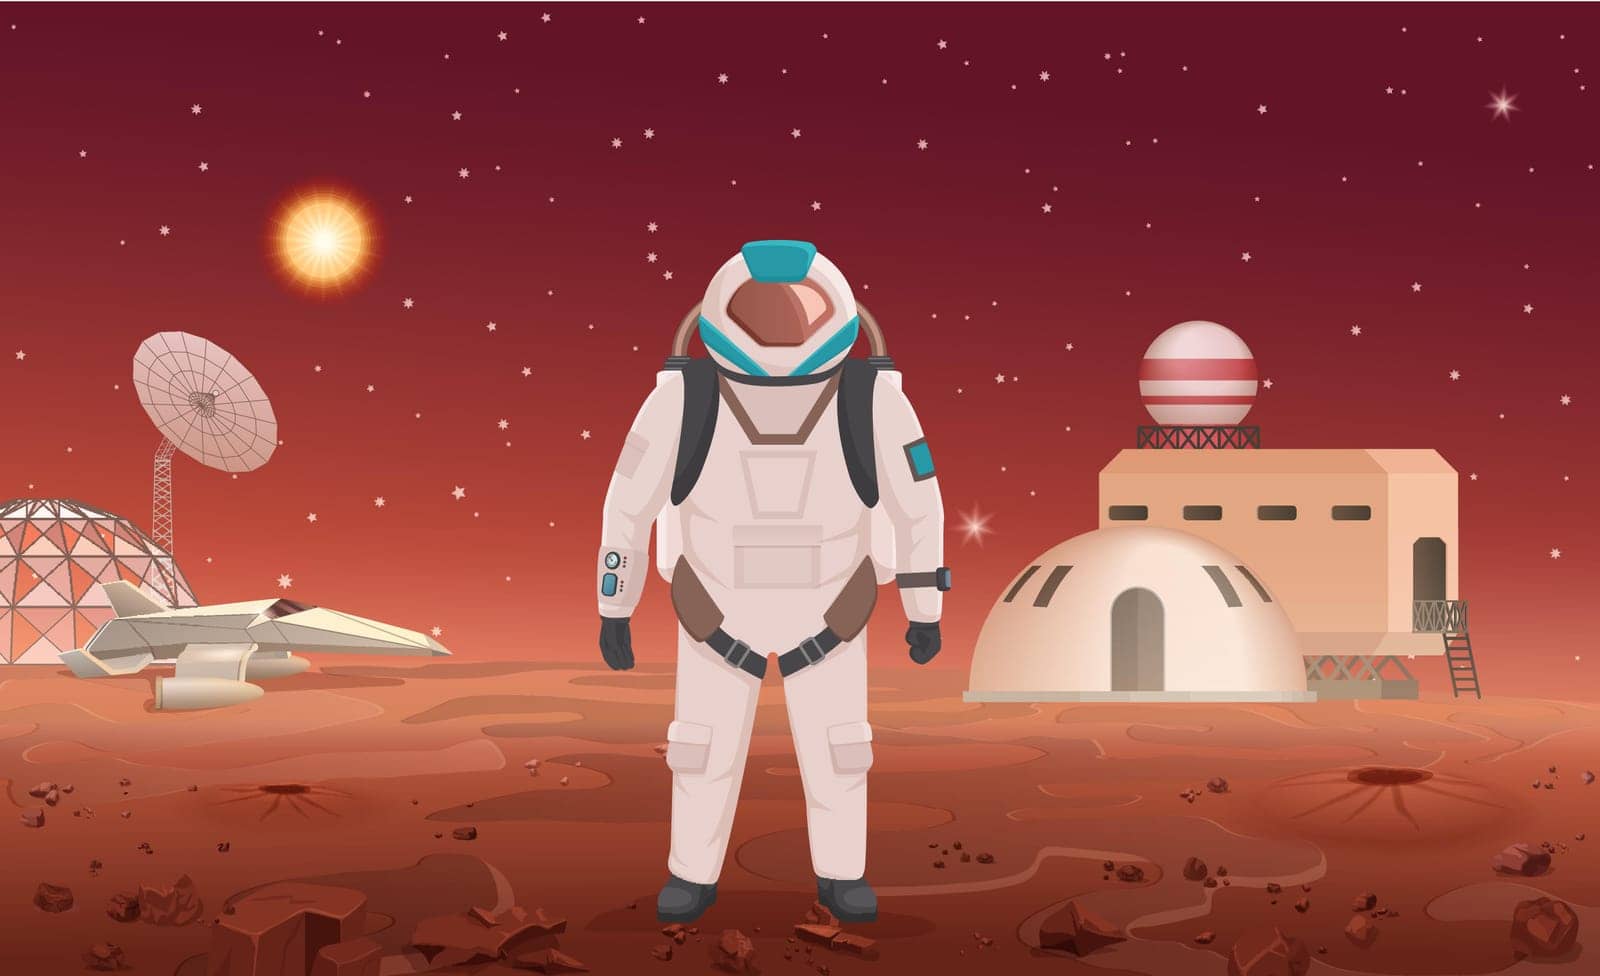 Vector illustration of astronaut in spacesuit standing at colony on planet